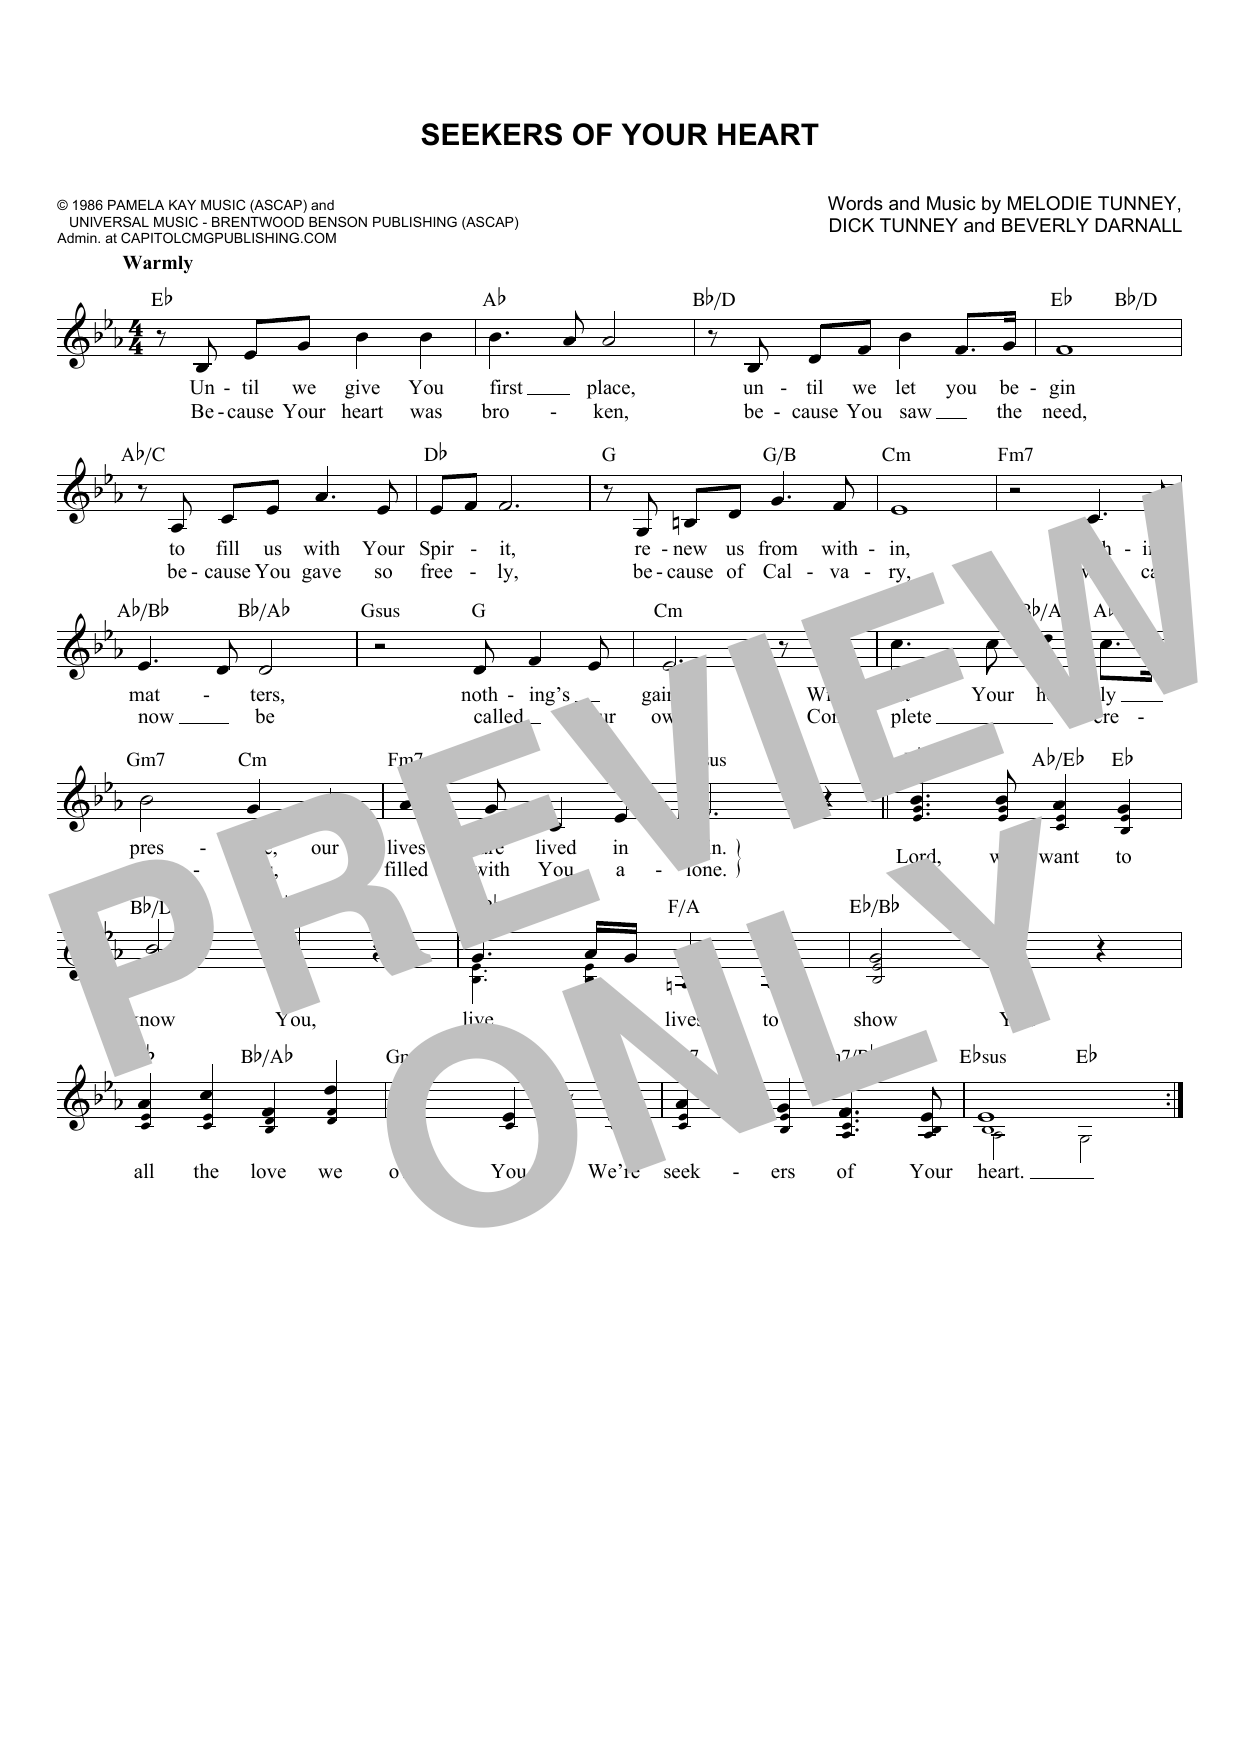 Download Dick & Mel Tunney Seekers Of Your Heart Sheet Music